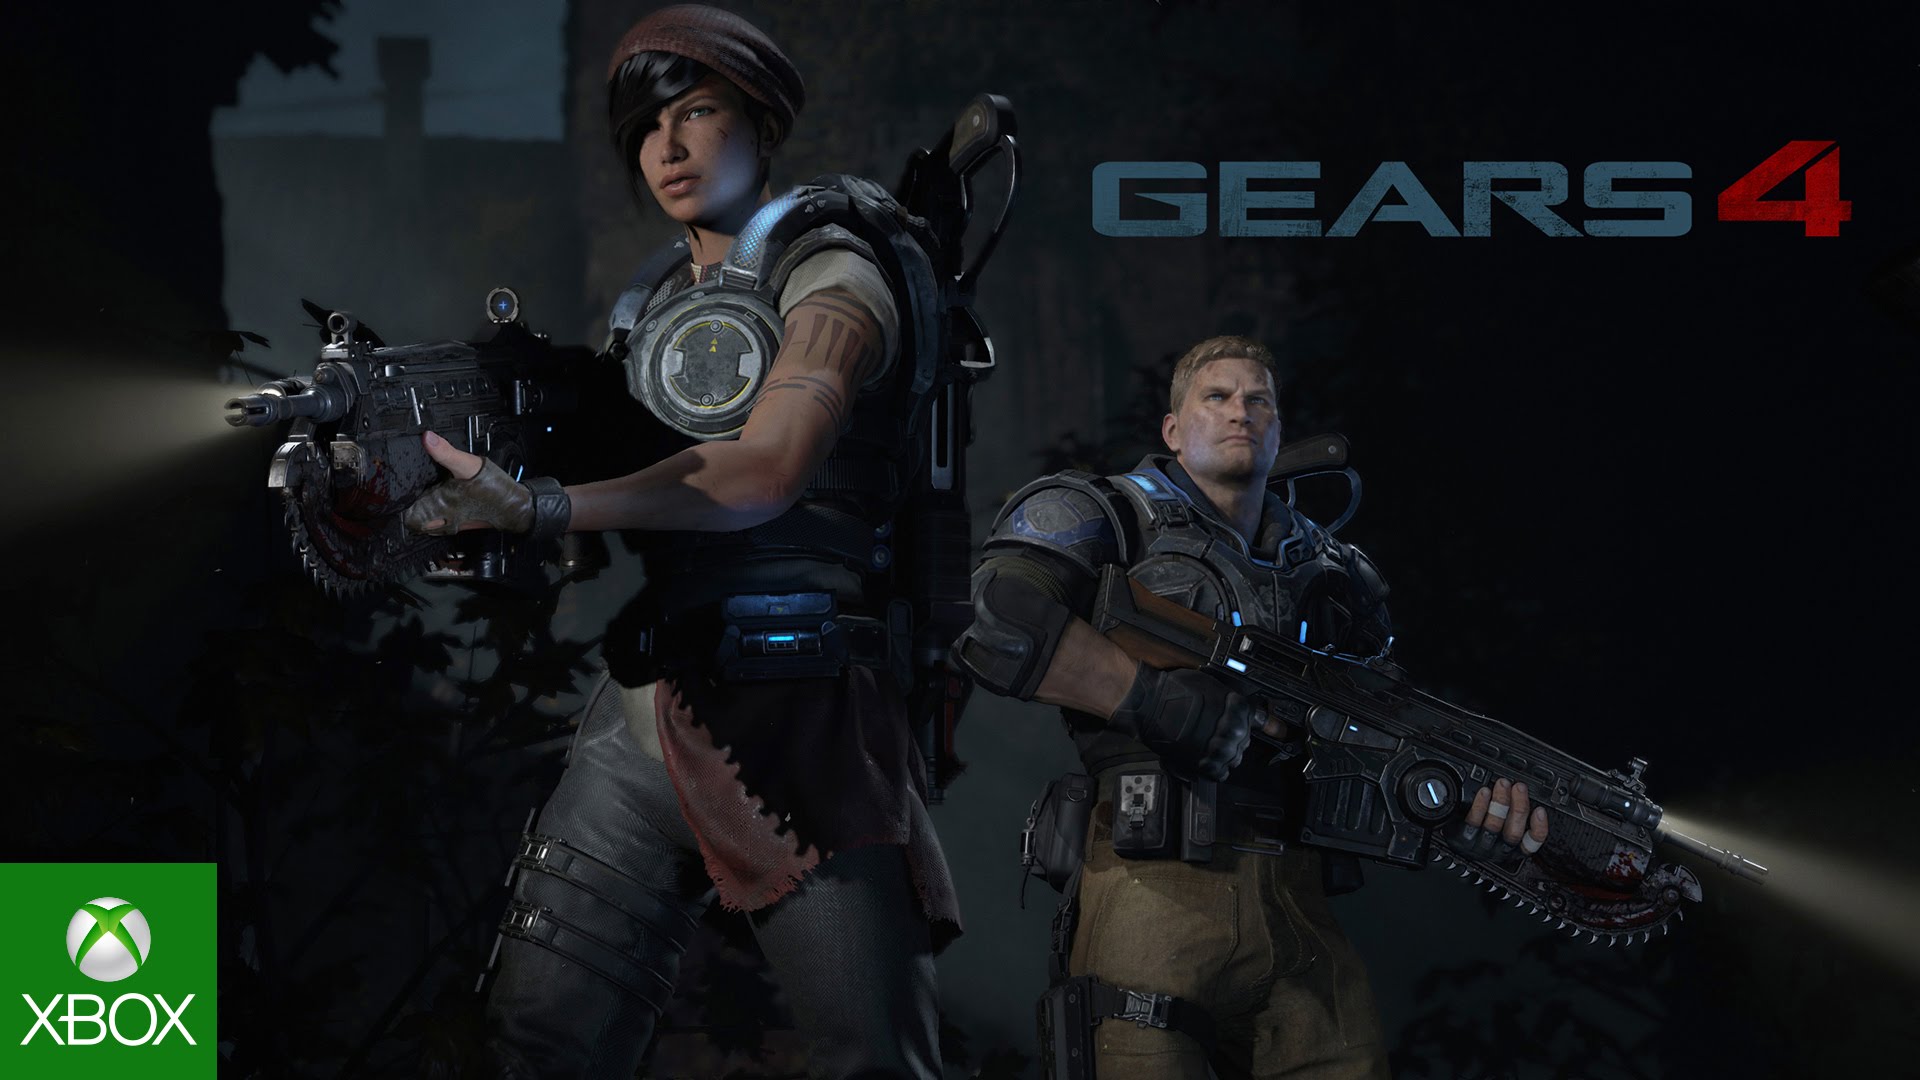 Video For Gears of War 4 Is Coming in 2016 and the Gears of Wars: Ultimate Edition Multiplayer Beta Starts Now!